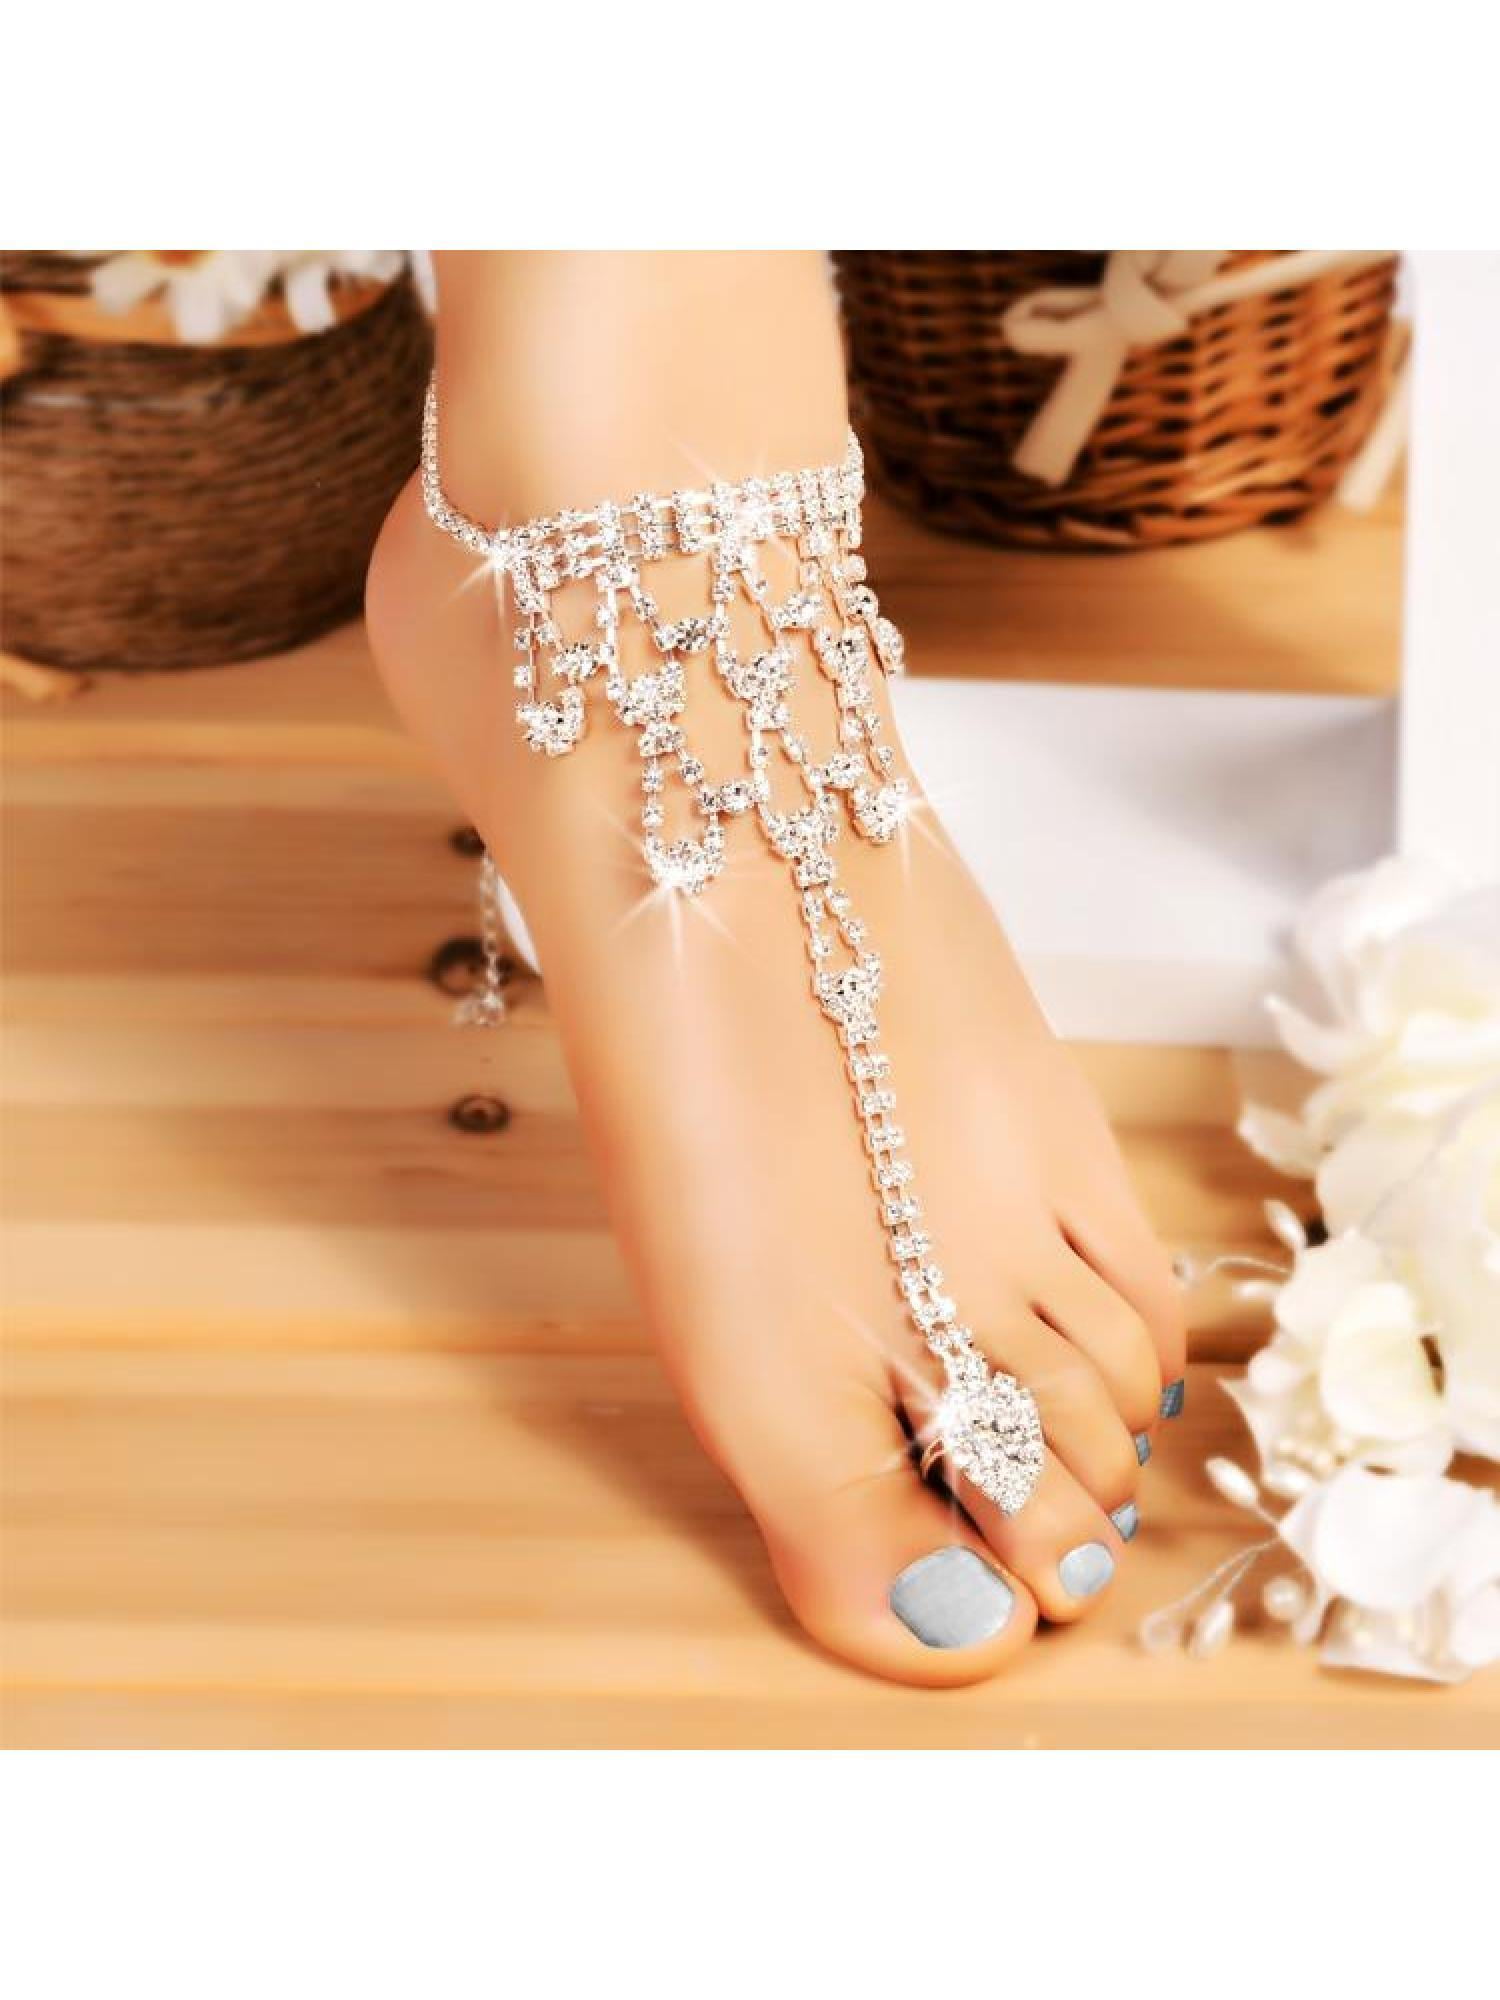 Crystal Barefoot Sandals Beach Chain Anklet Wedding Foot Anklet Women Jewelry nx